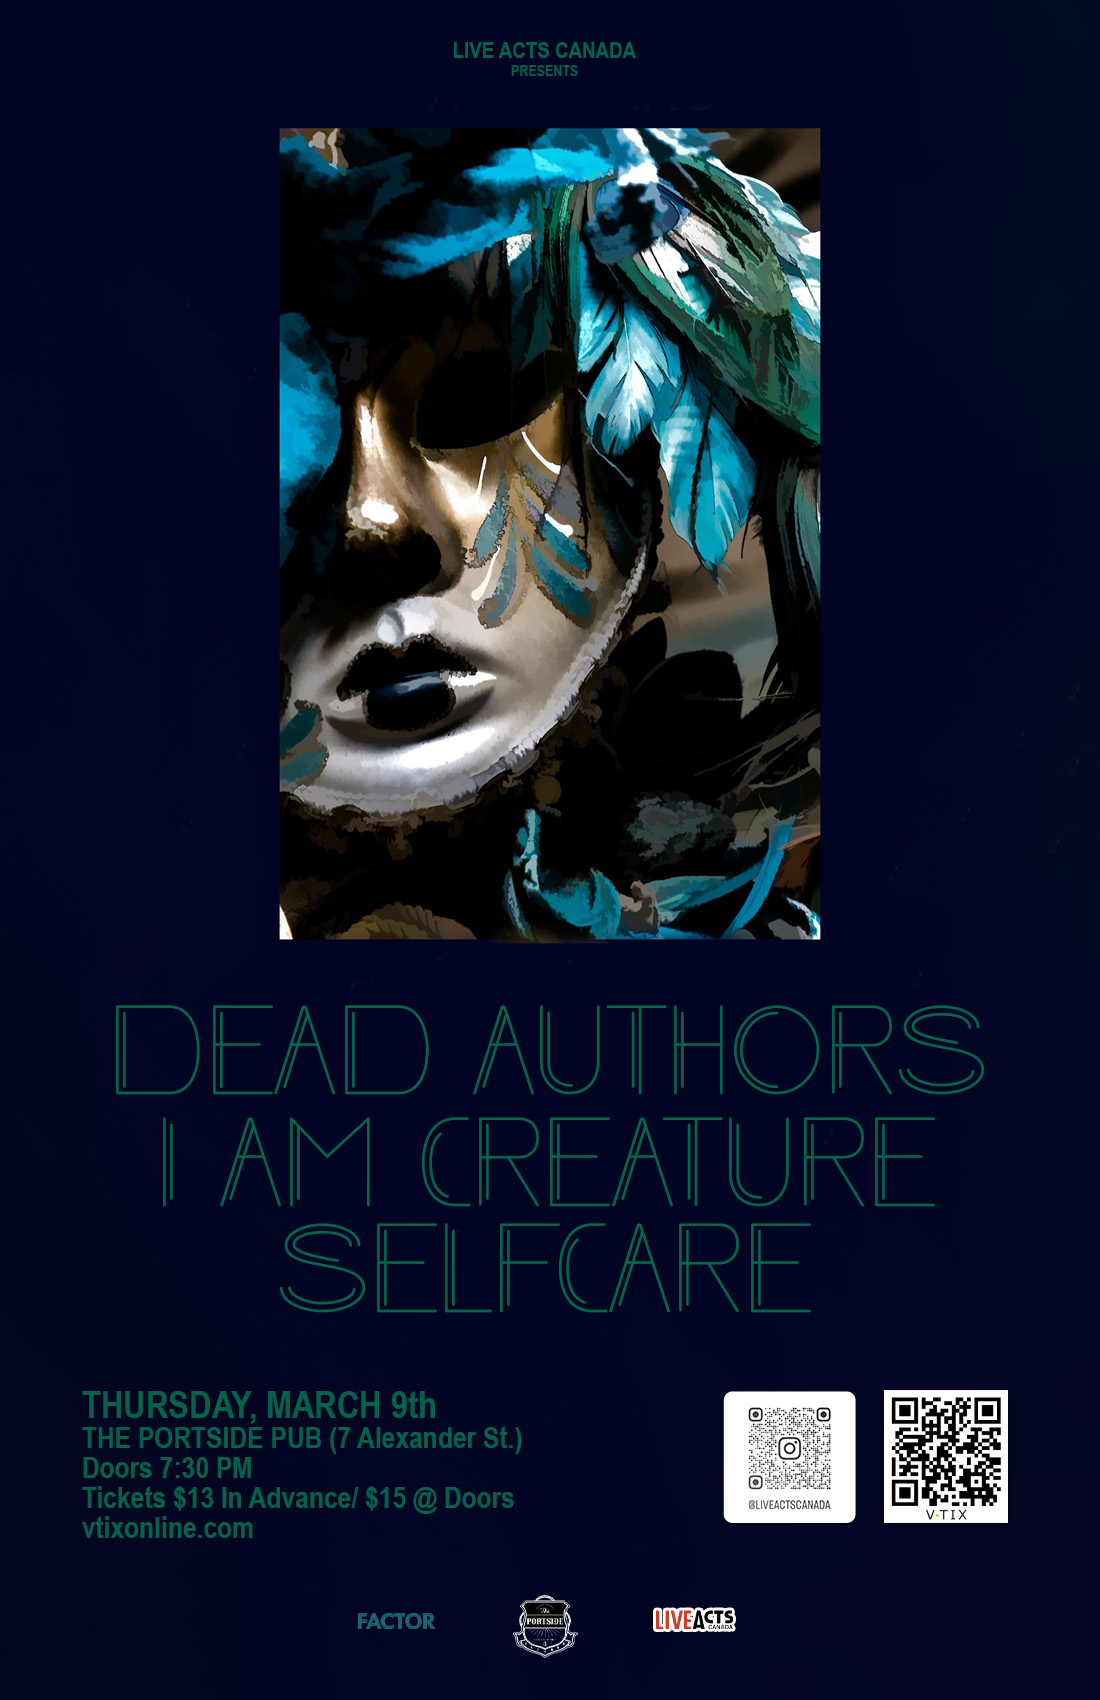 Dead Authors with Special Guests I AM creature and Selfcare